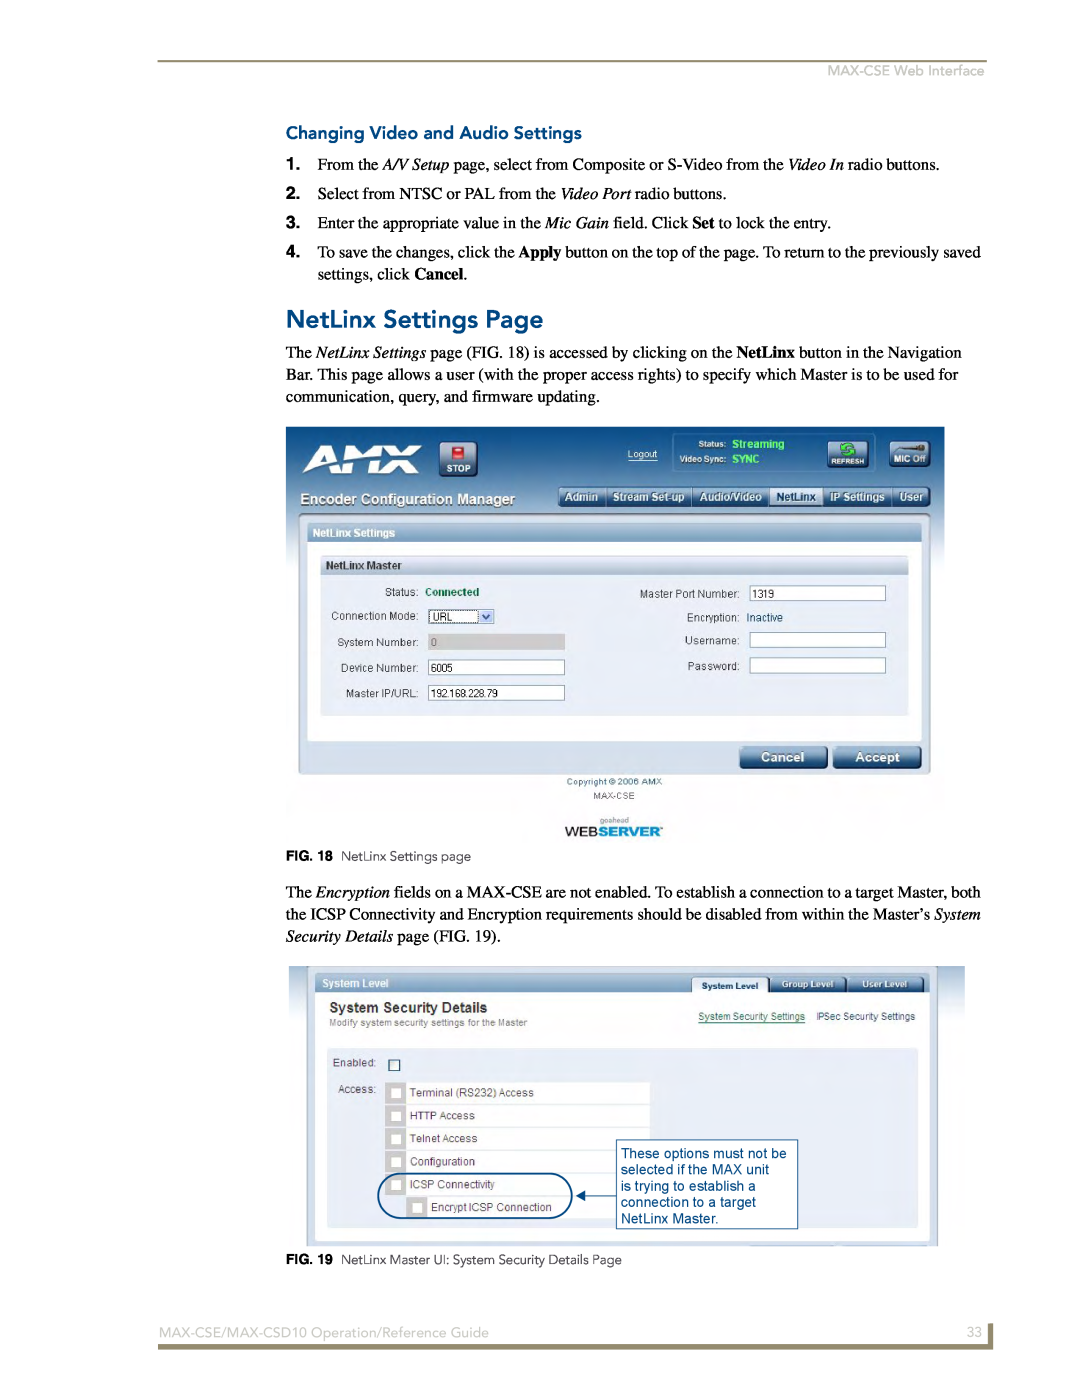 AMX MAX-CSD 10, MAX-CSE manual NetLinx Settings Page, Changing Video and Audio Settings 